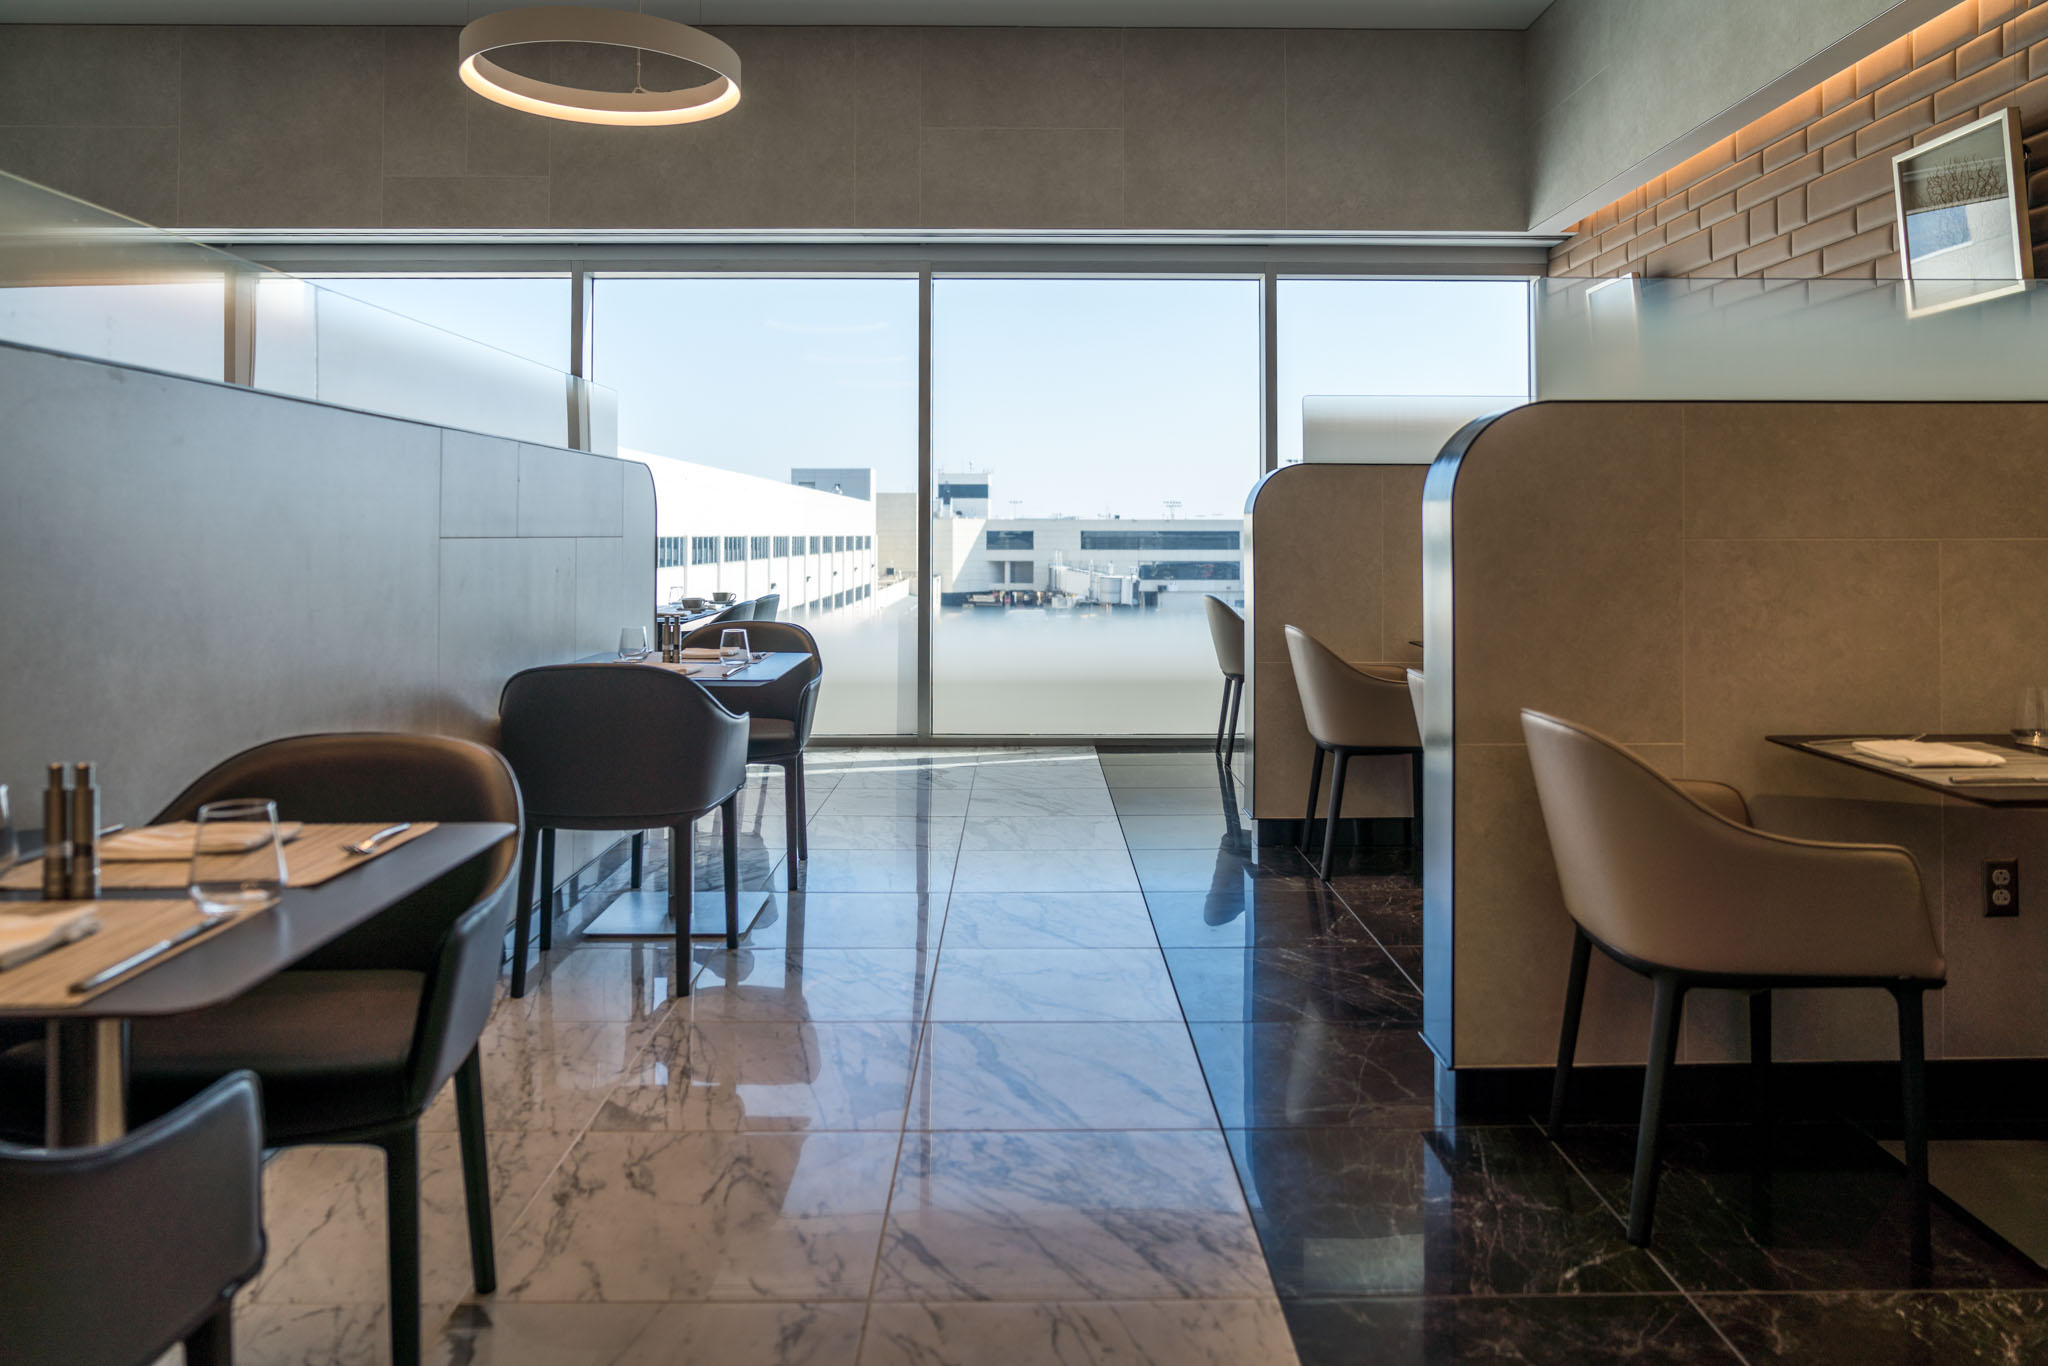 american airlines flagship first dining lax